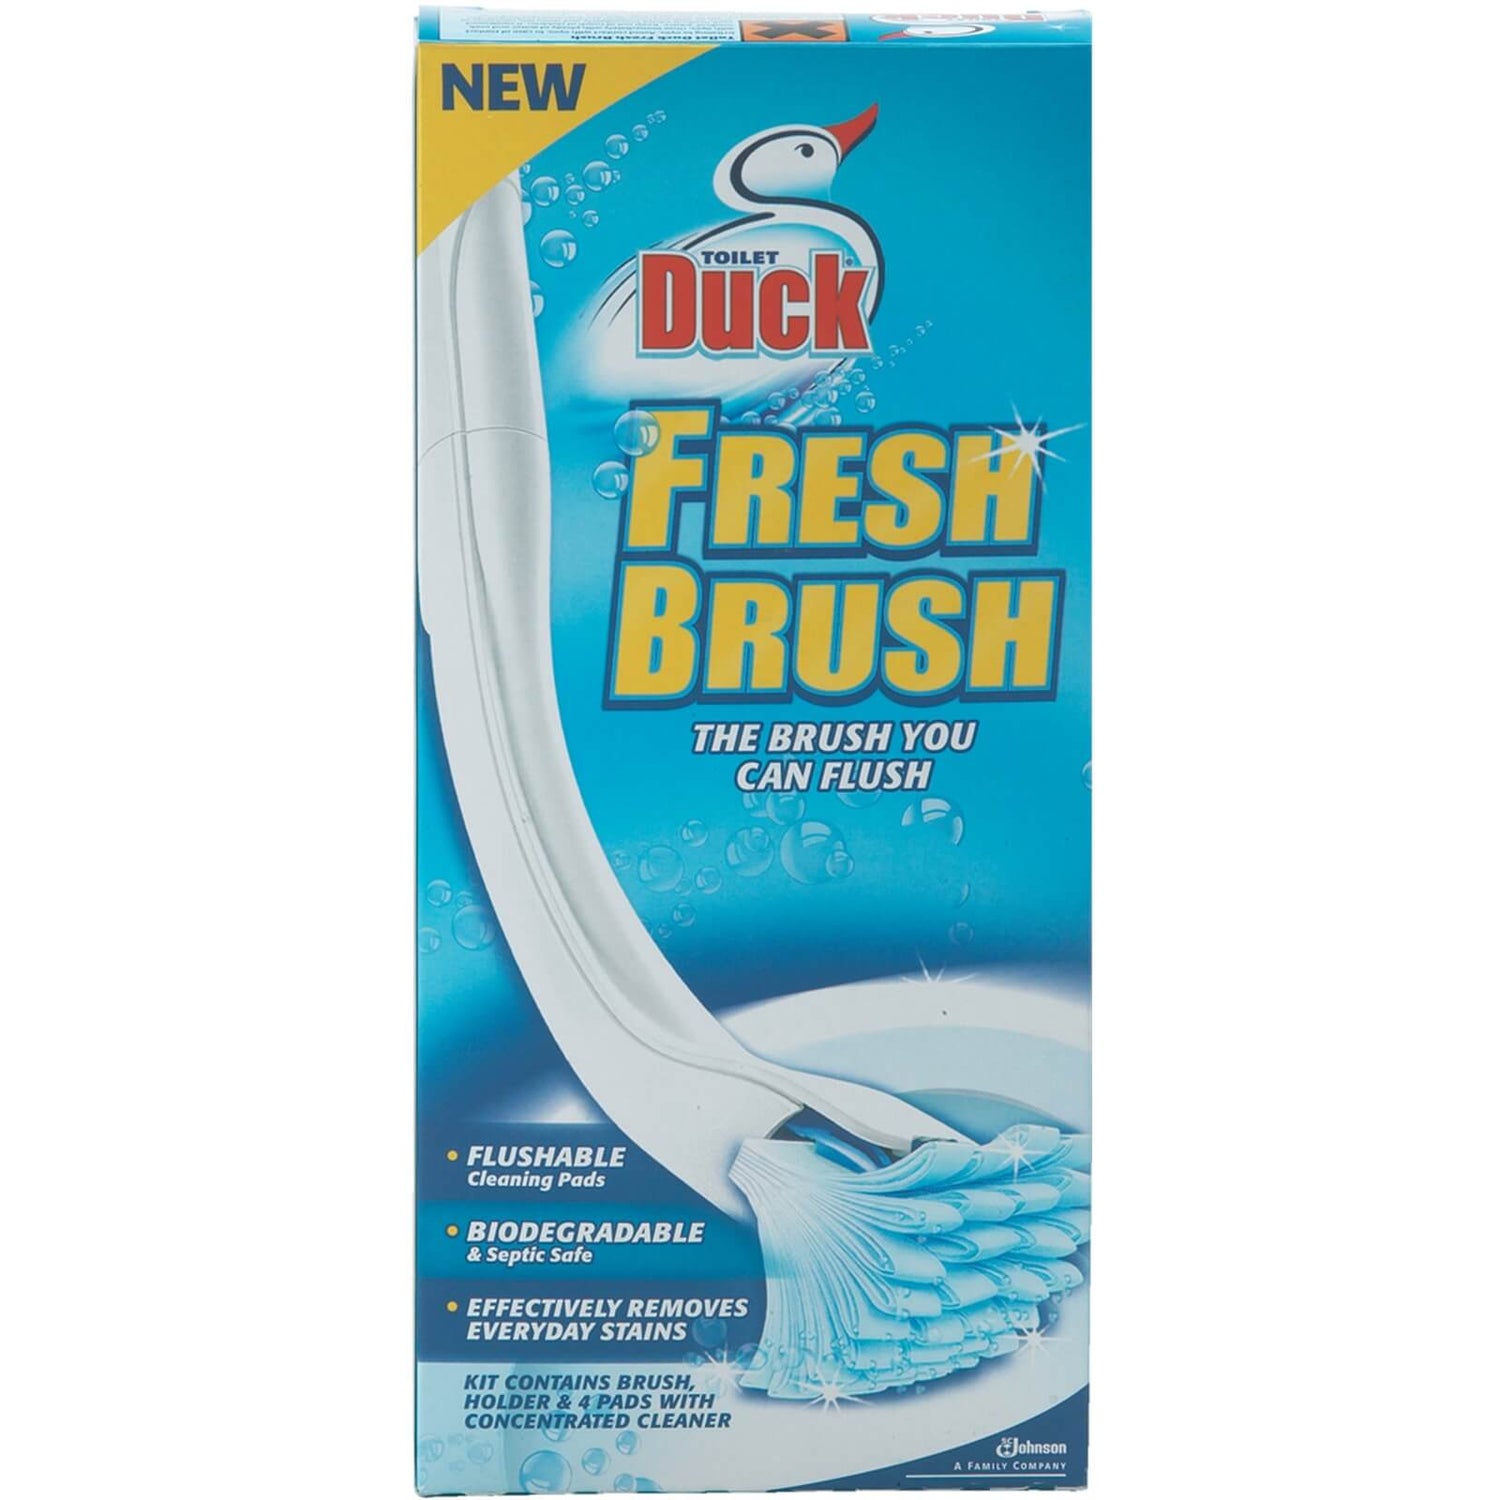 Love the duck fresh brush you don't need lots of chemicals really easy